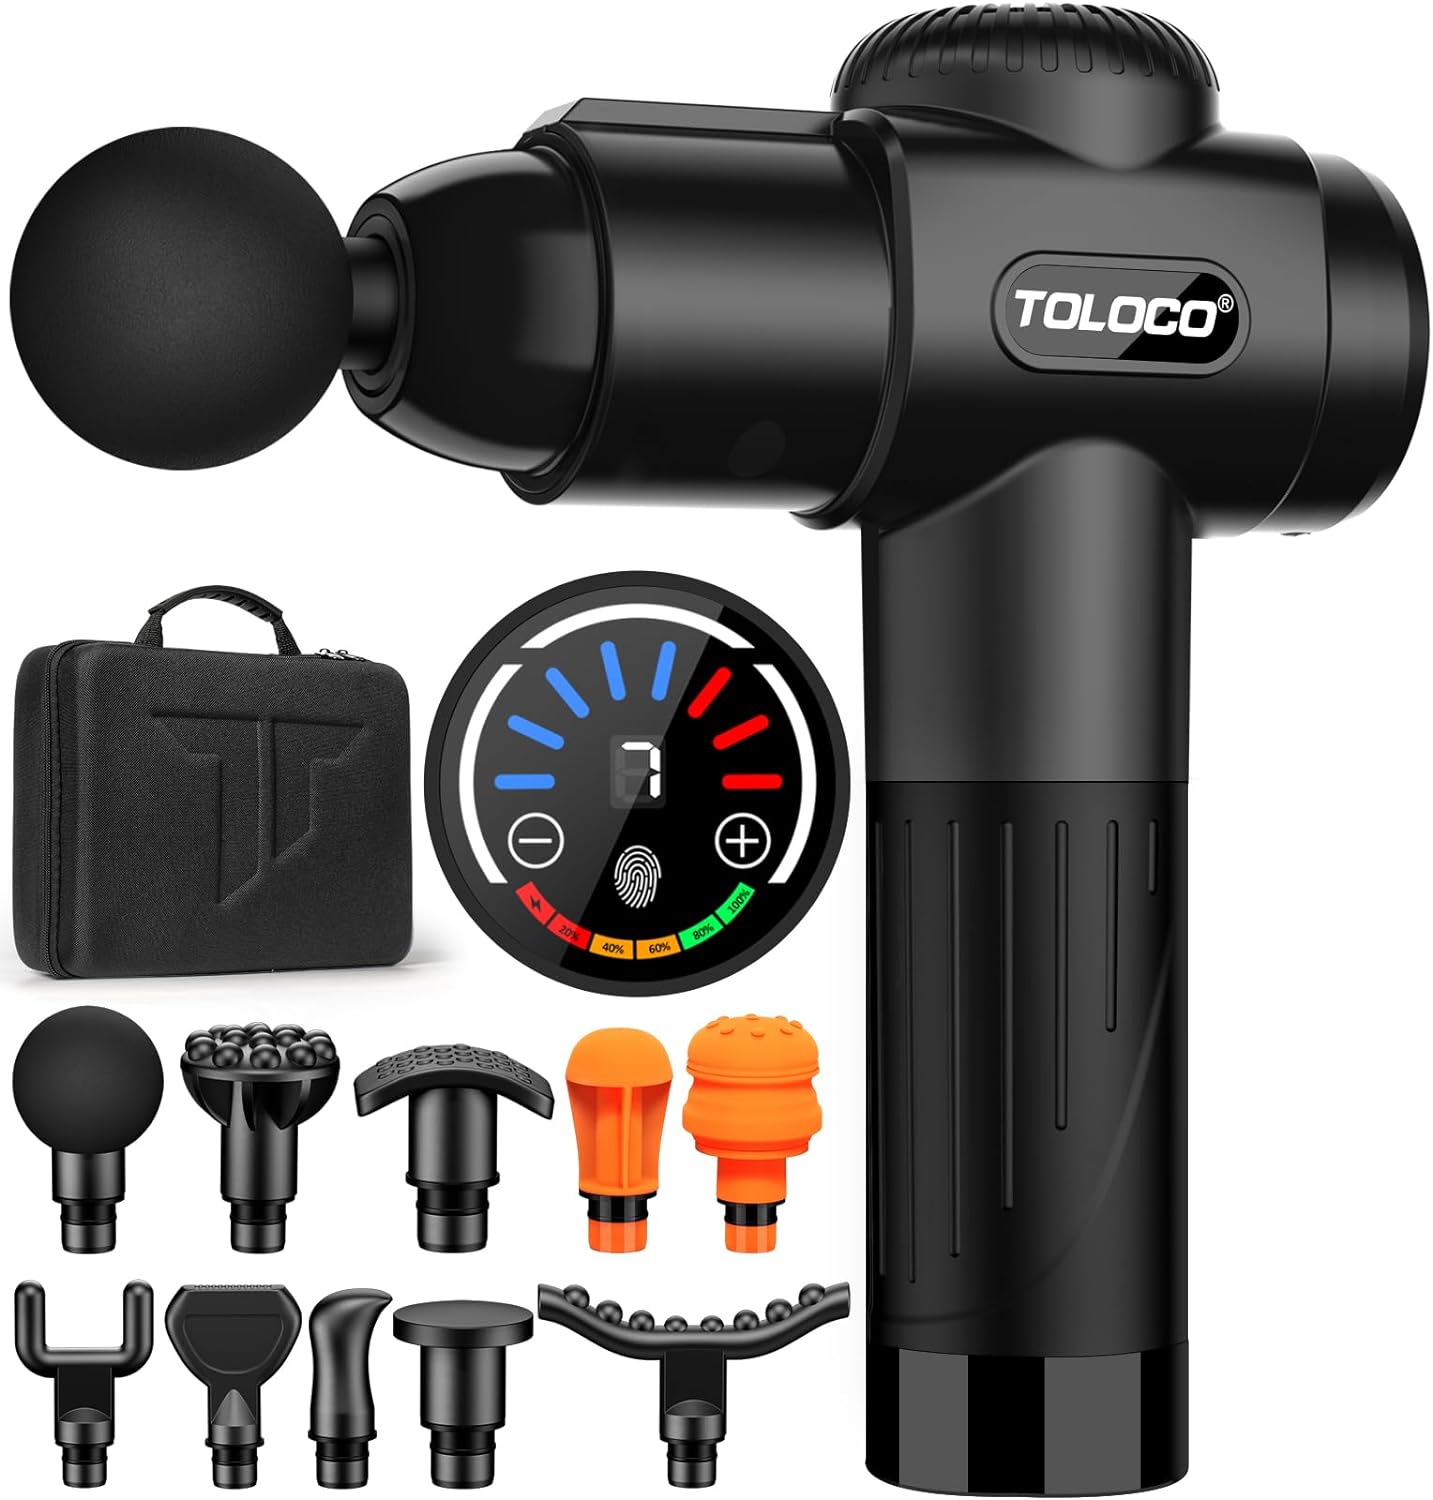 TOLOCO Massage Gun Deep Tissue, Back Massage Gun for Athletes for Pain Relief, Percussion Massager with 10 Massages Heads & Silent Brushless Motor, Christmas Gifts for Men&Women, Black